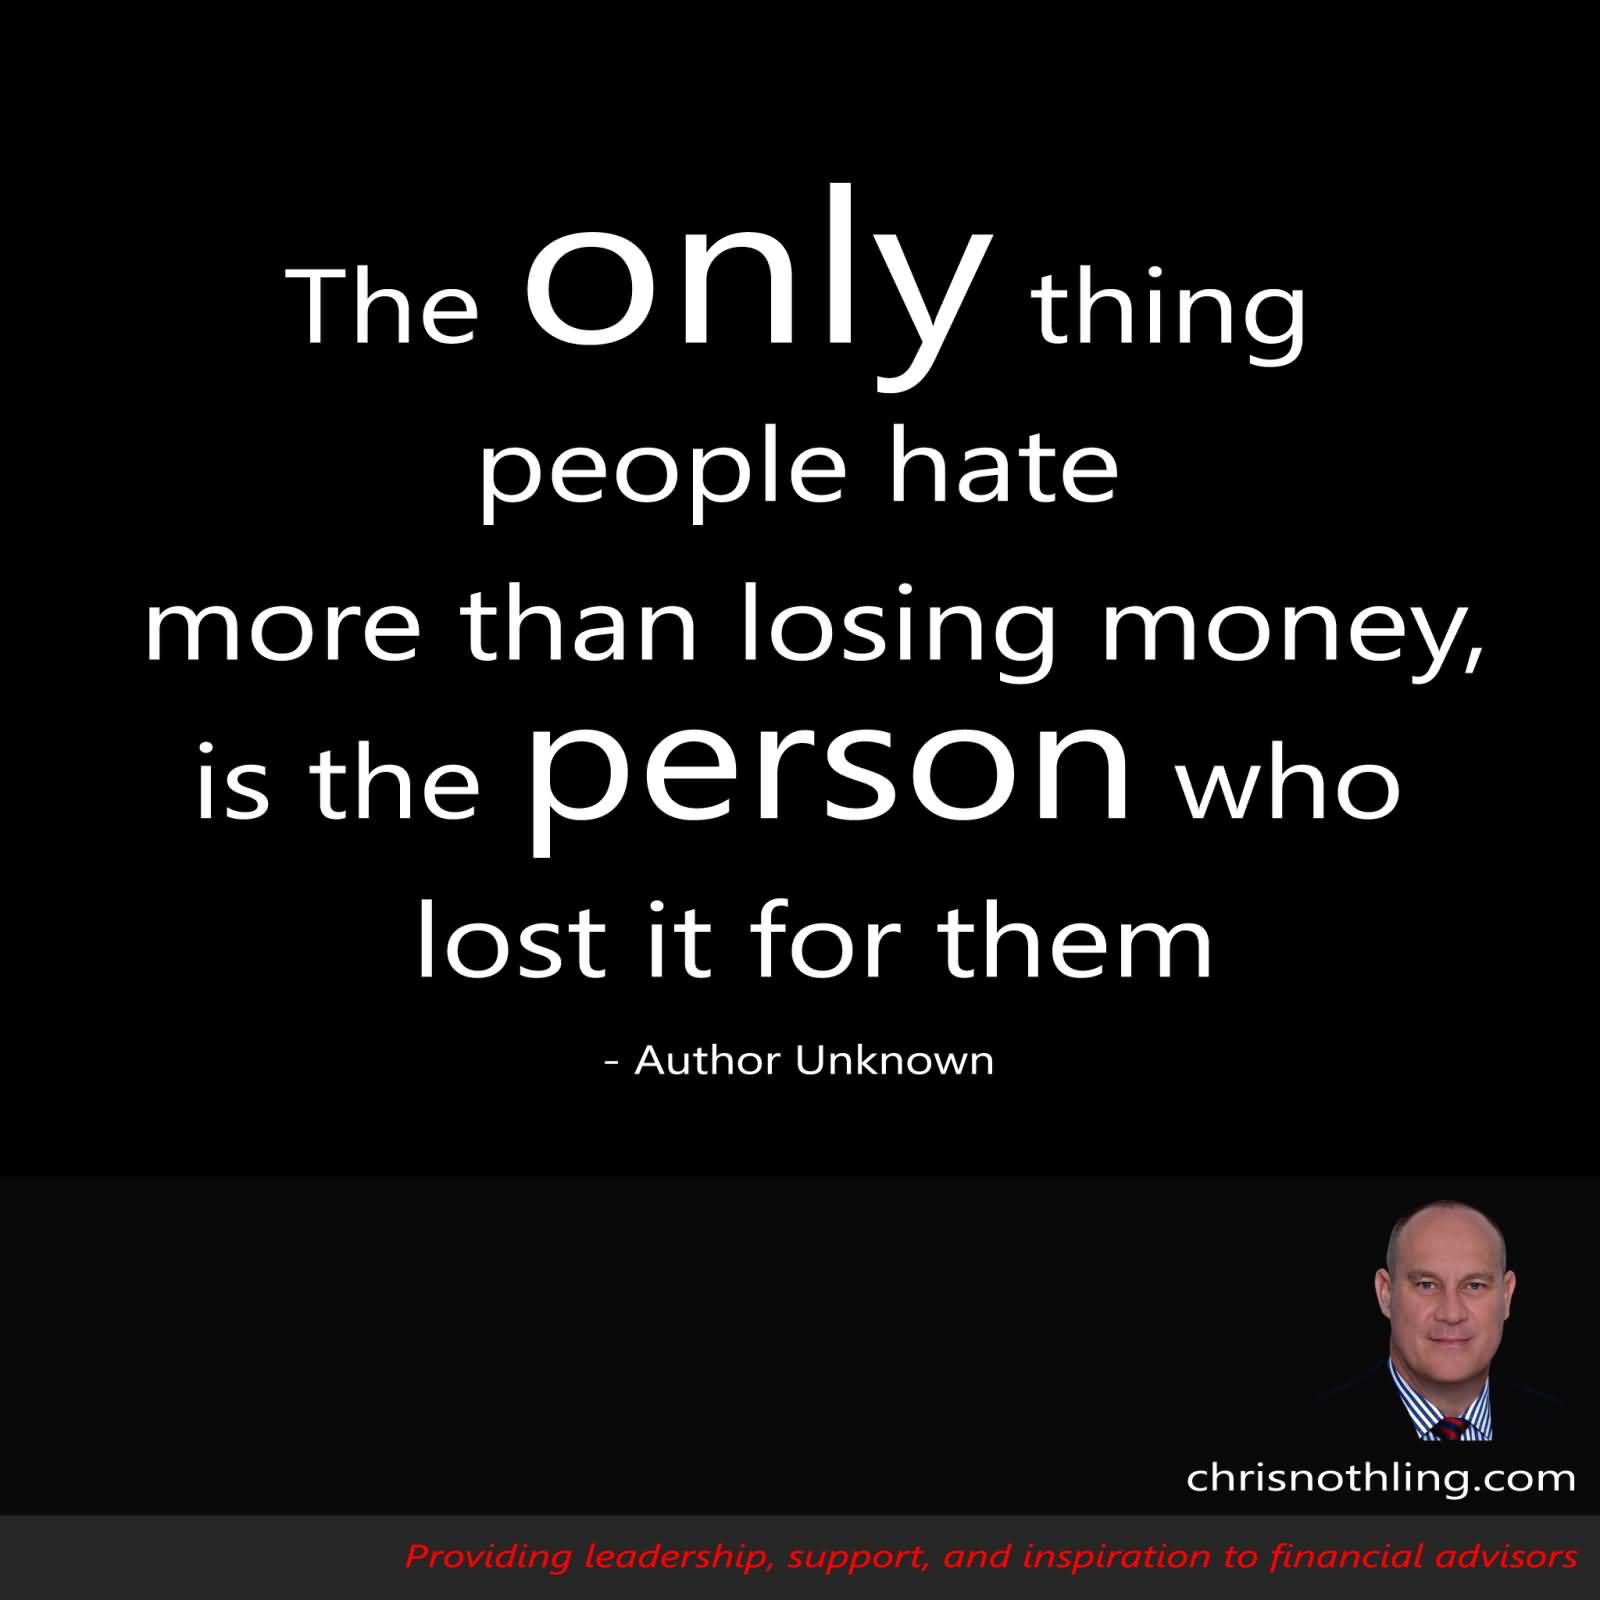 The only thing people hate more than losing money is the person who lost it for them